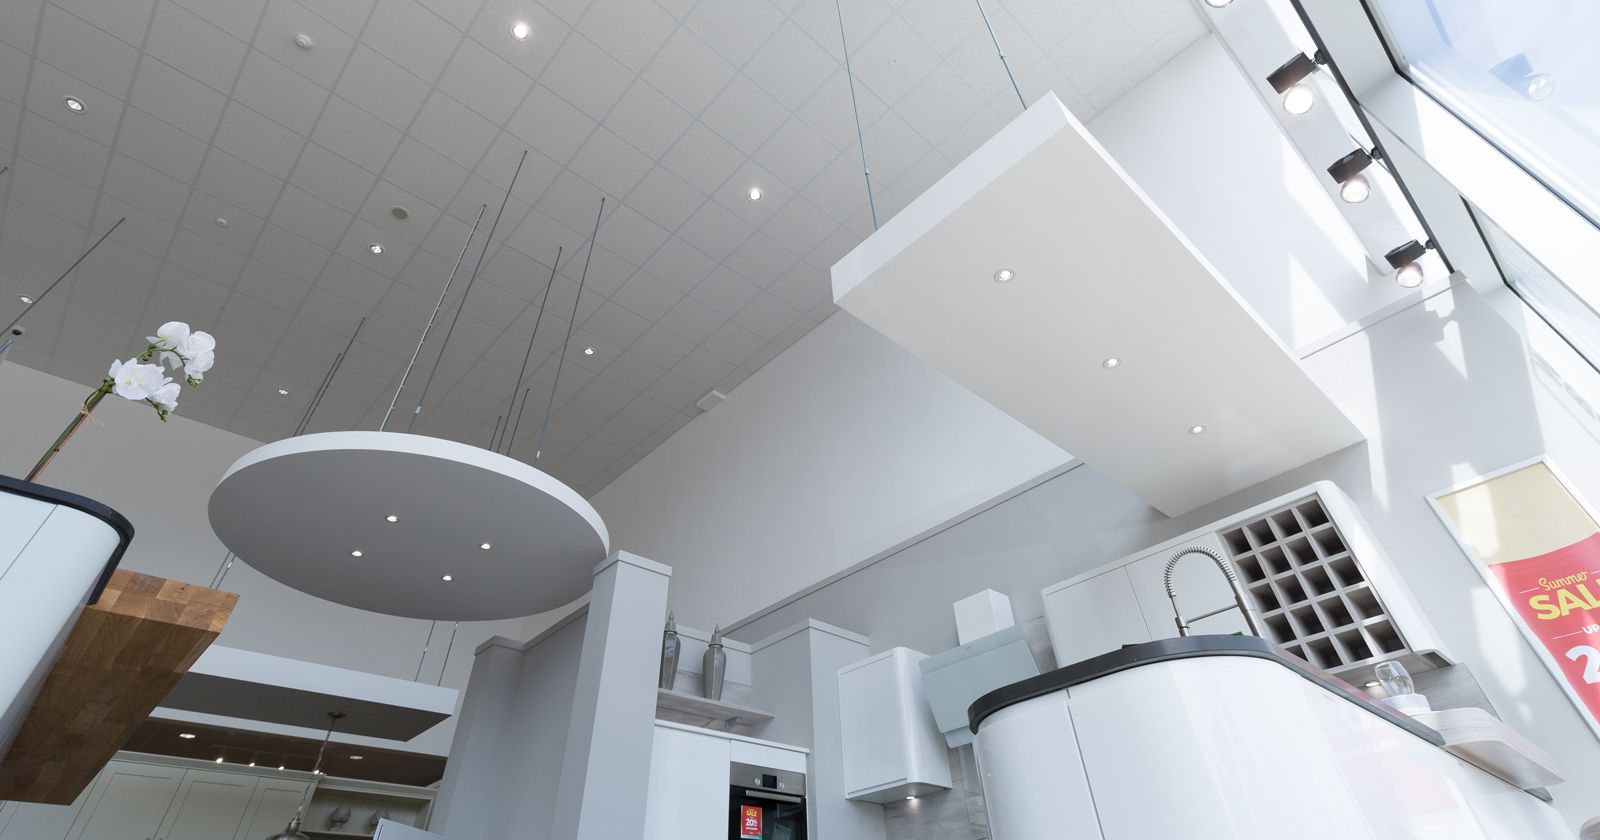 Wren Kitchens Croydon Retail Fit Out Suspended Ceilings By APSS